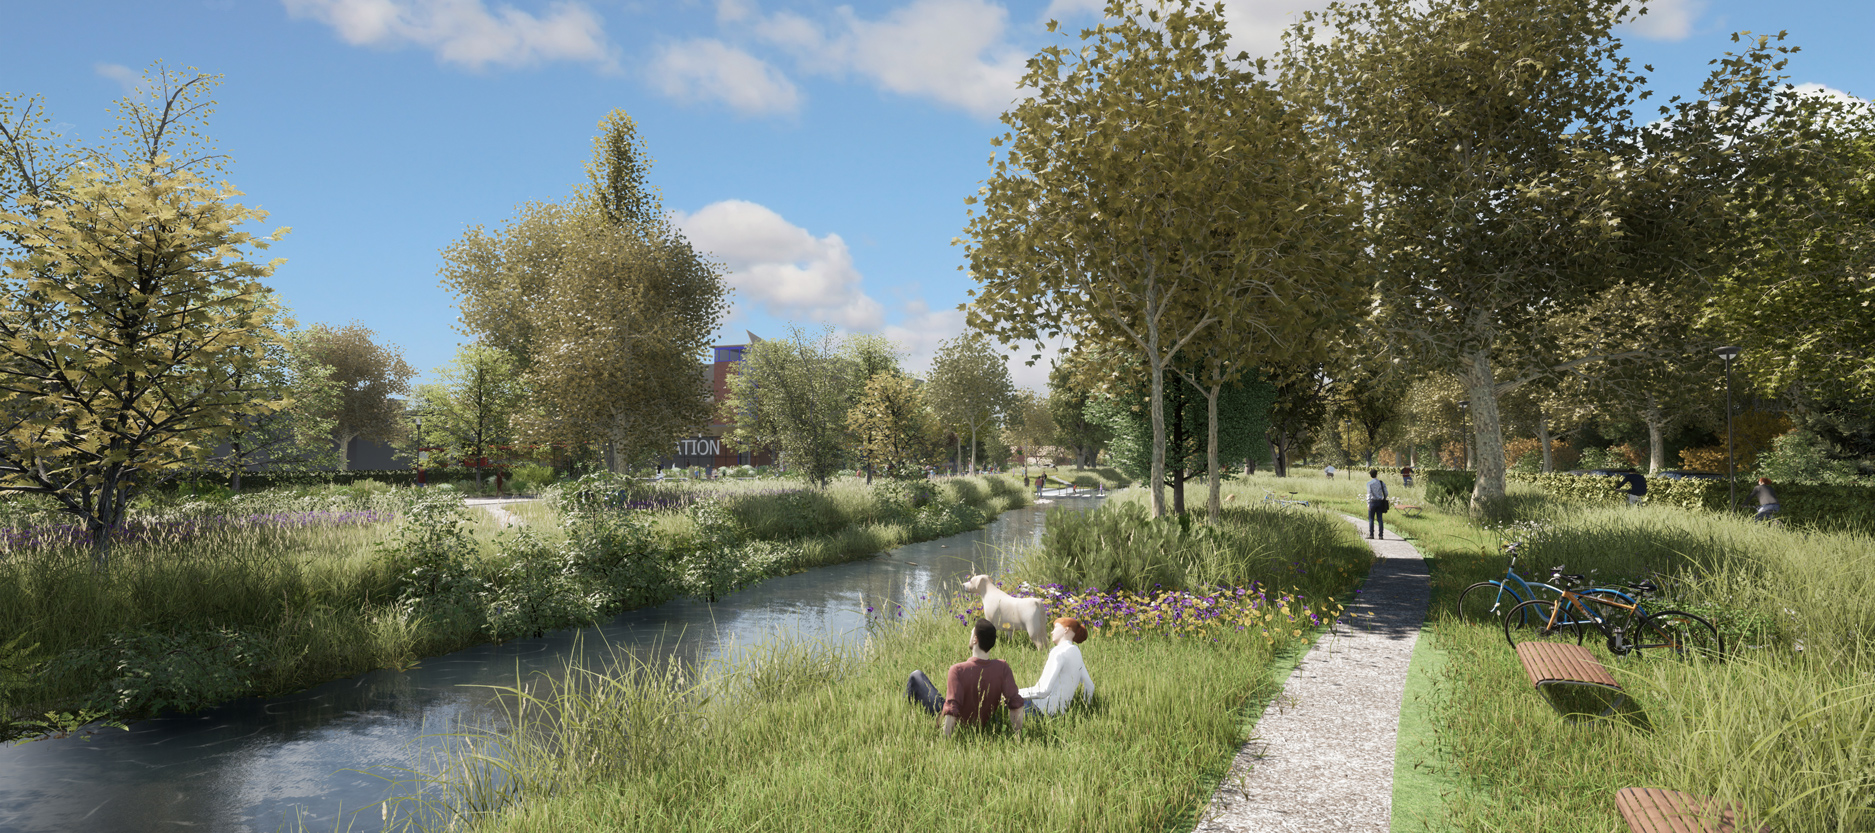 Reducing the scale of the gyrator opens up the River Anton as a natural corridor for walking and cycling and improves connections into the town centre